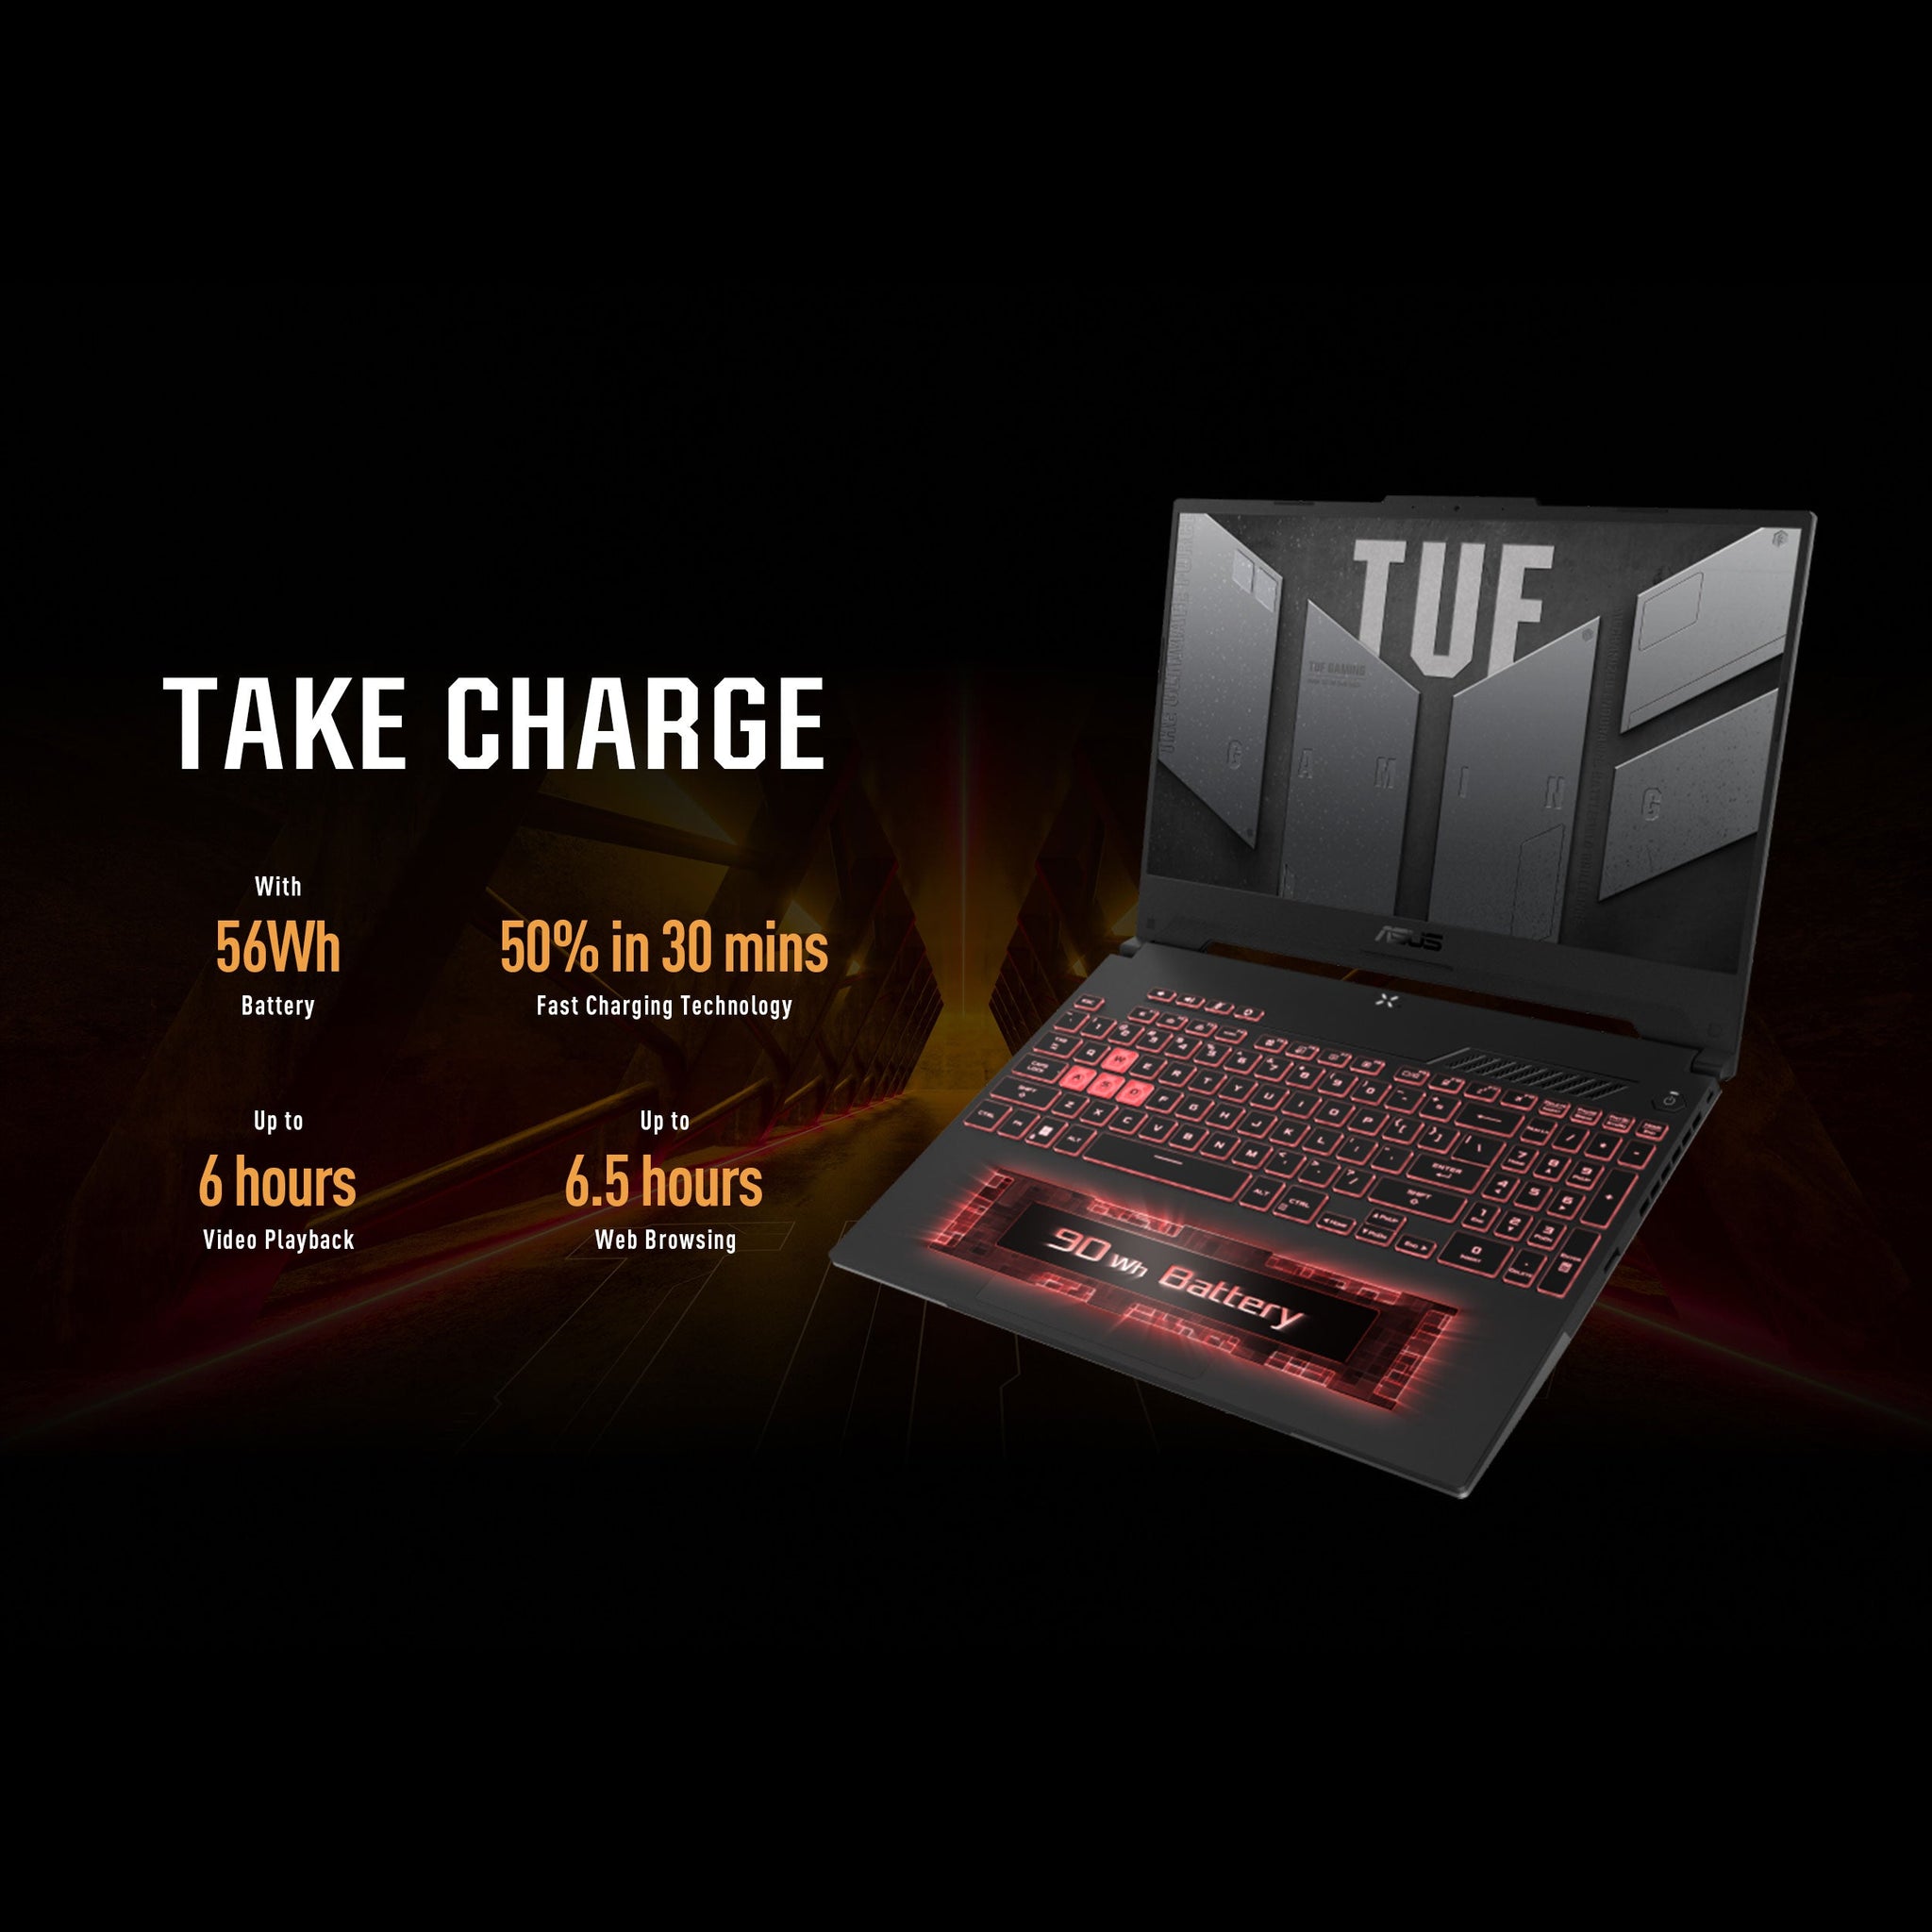 ASUS TUF GAMING FA507NU-LP031W | AMD R7 7735H 3.20 GHZ, 16GB RAM, 512GB SSD, 6GB NVIDIA GeForce RTX 4050 Graphics, 15.6" FHD 144HZ, Windows 11 Home, Eng-Arabic Keyboard, Gray Color, 2 Years ASUS Warranty.